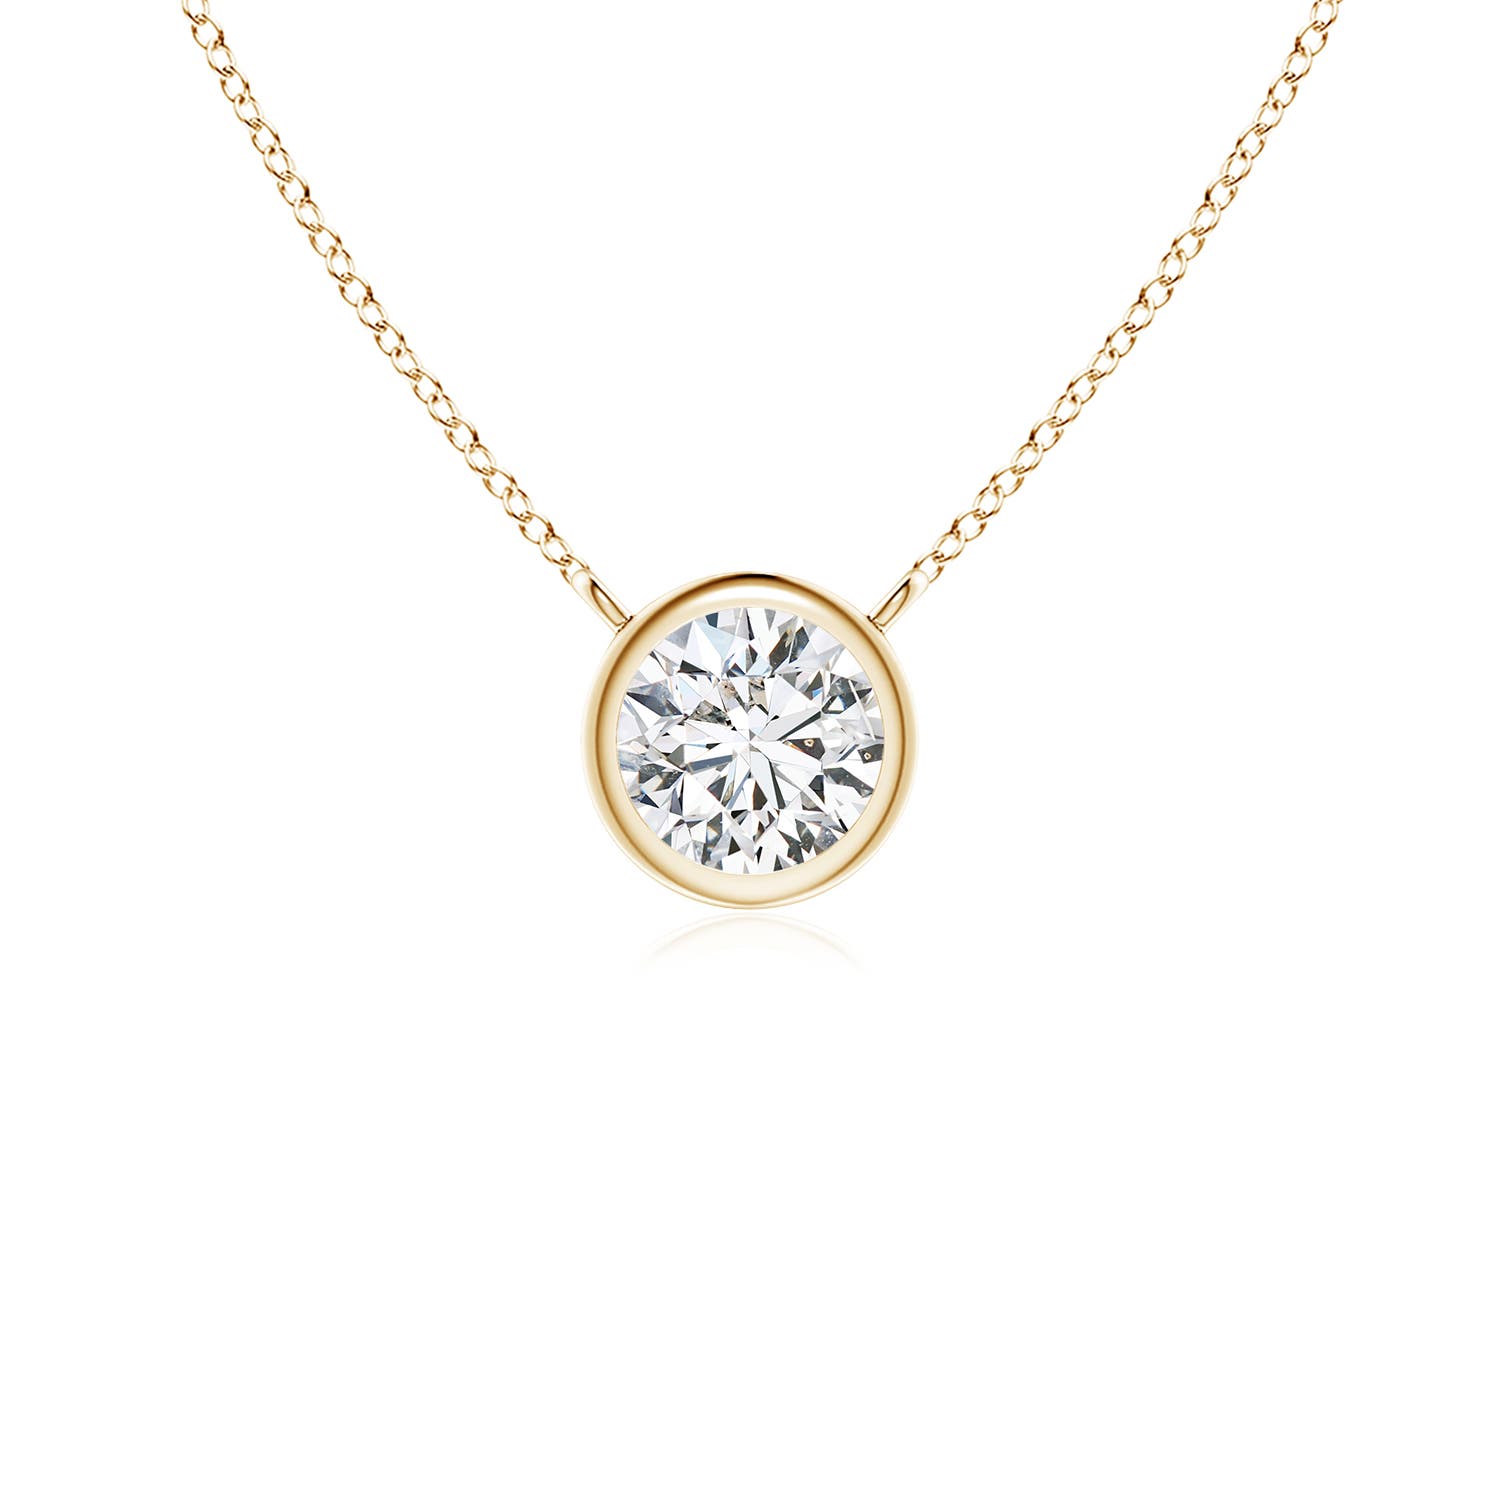 HSI2 / 0.15 CT / 14 KT Yellow Gold